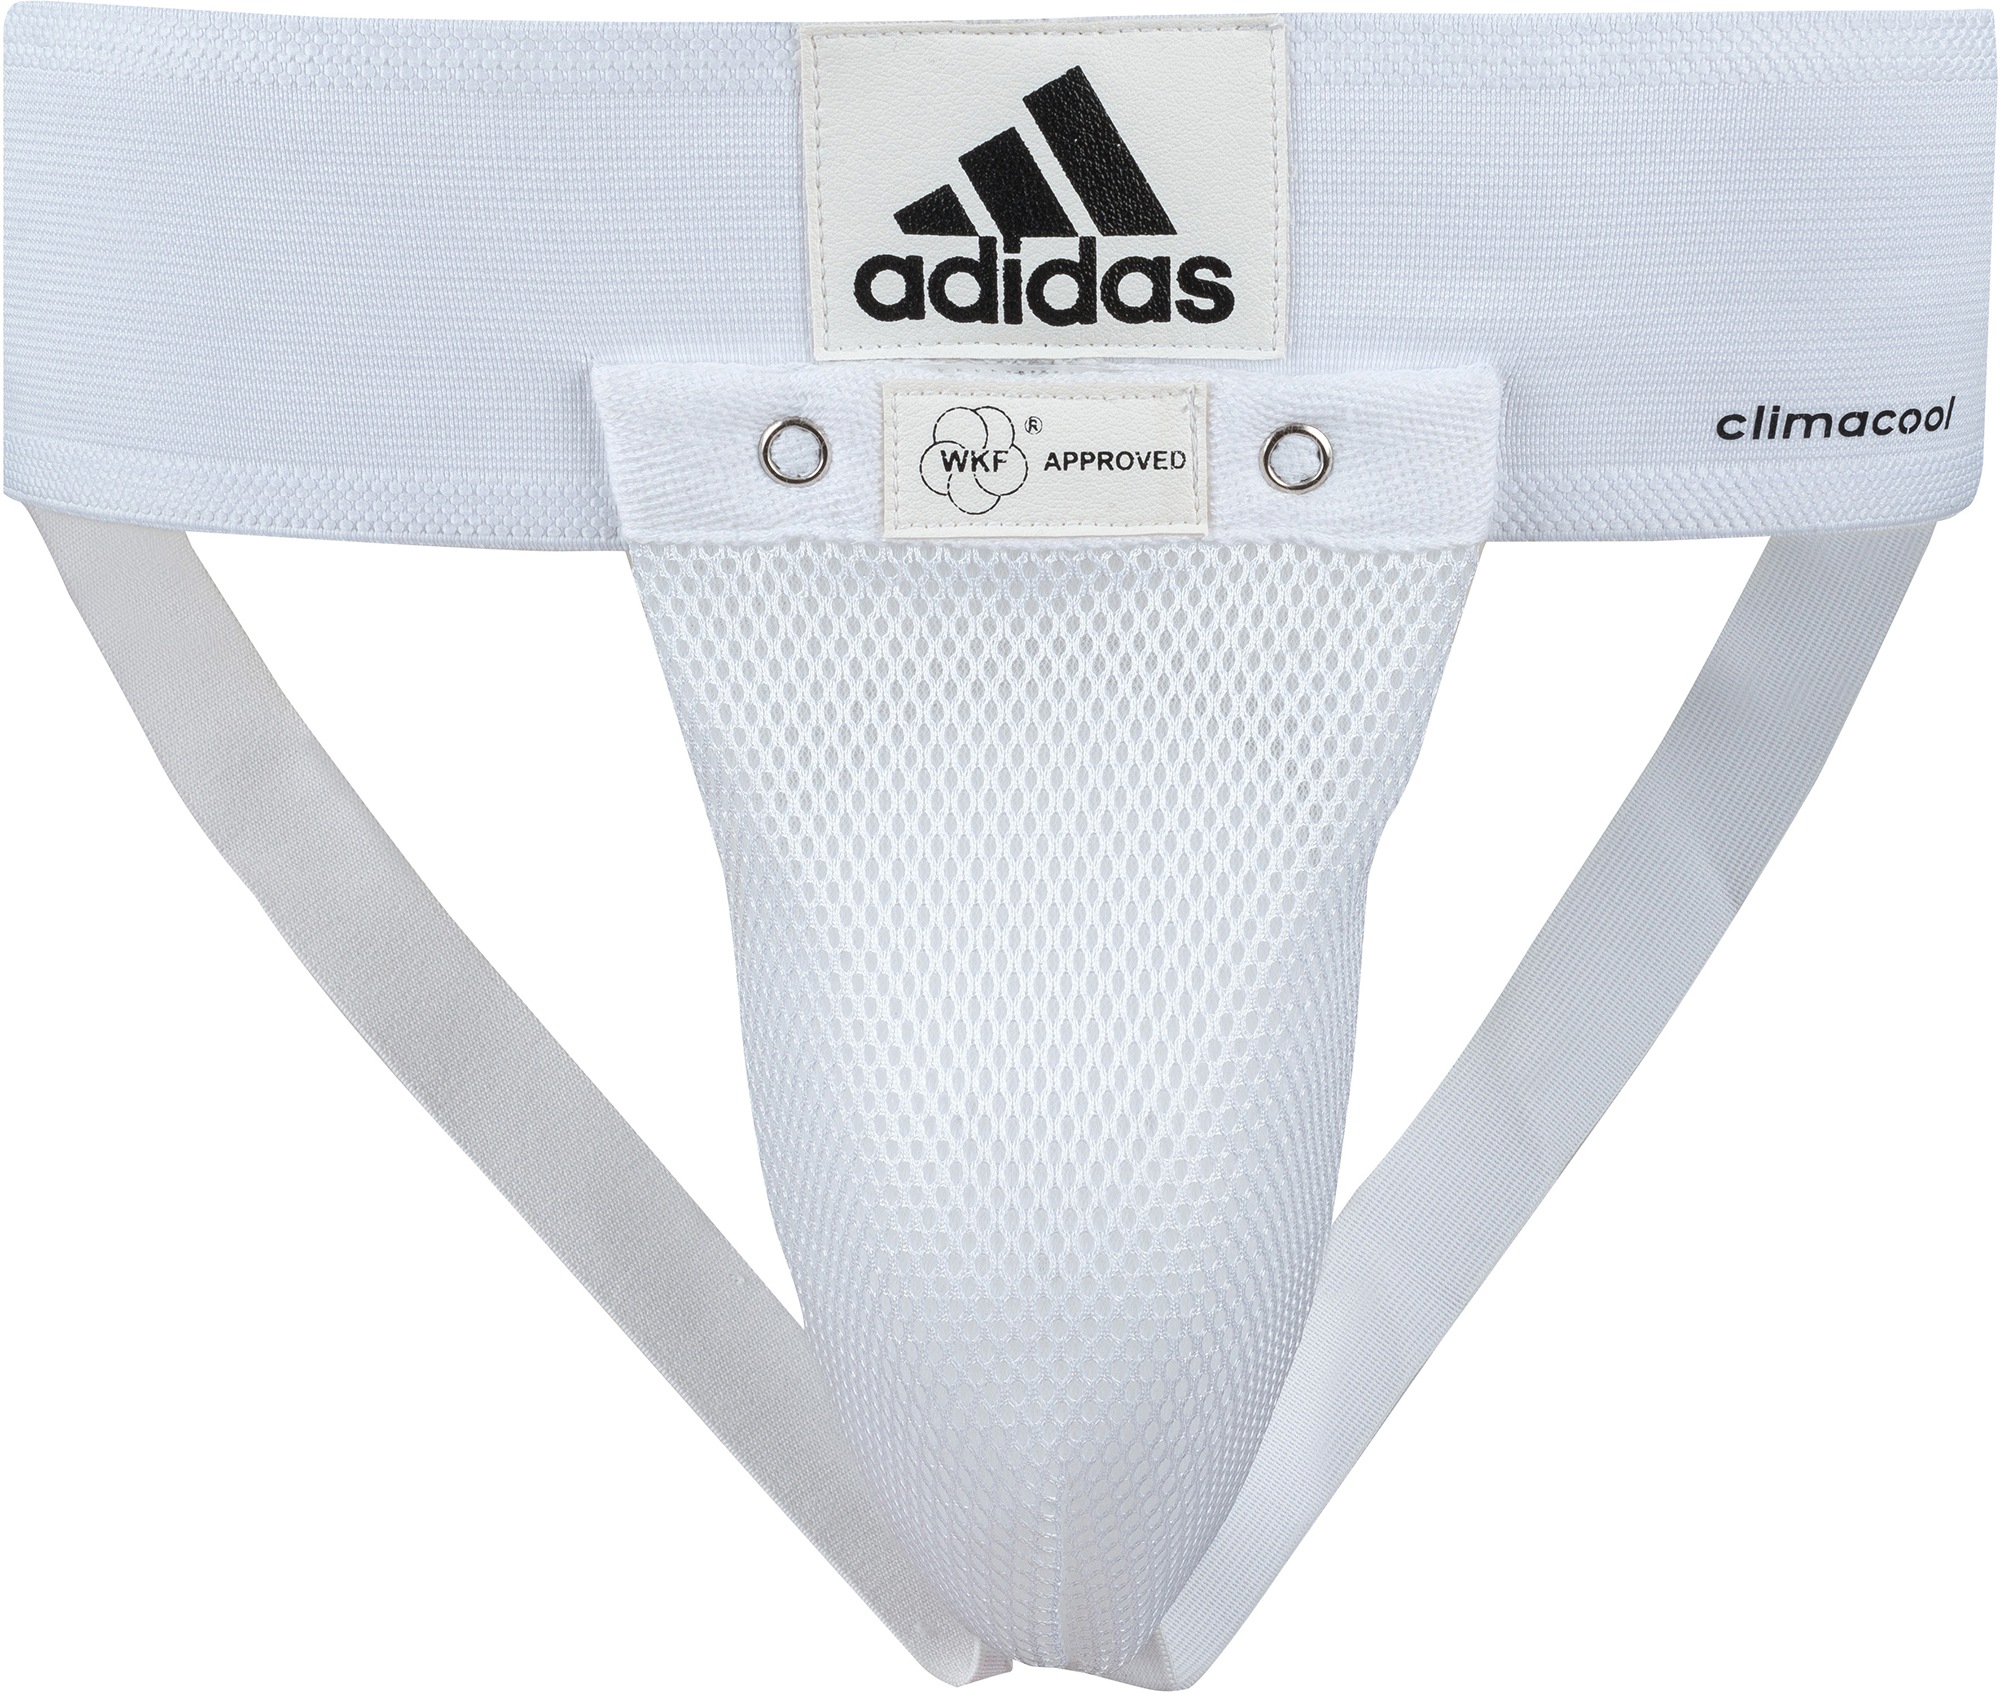 adidas Performance Schutzhose "Cup Supporters"